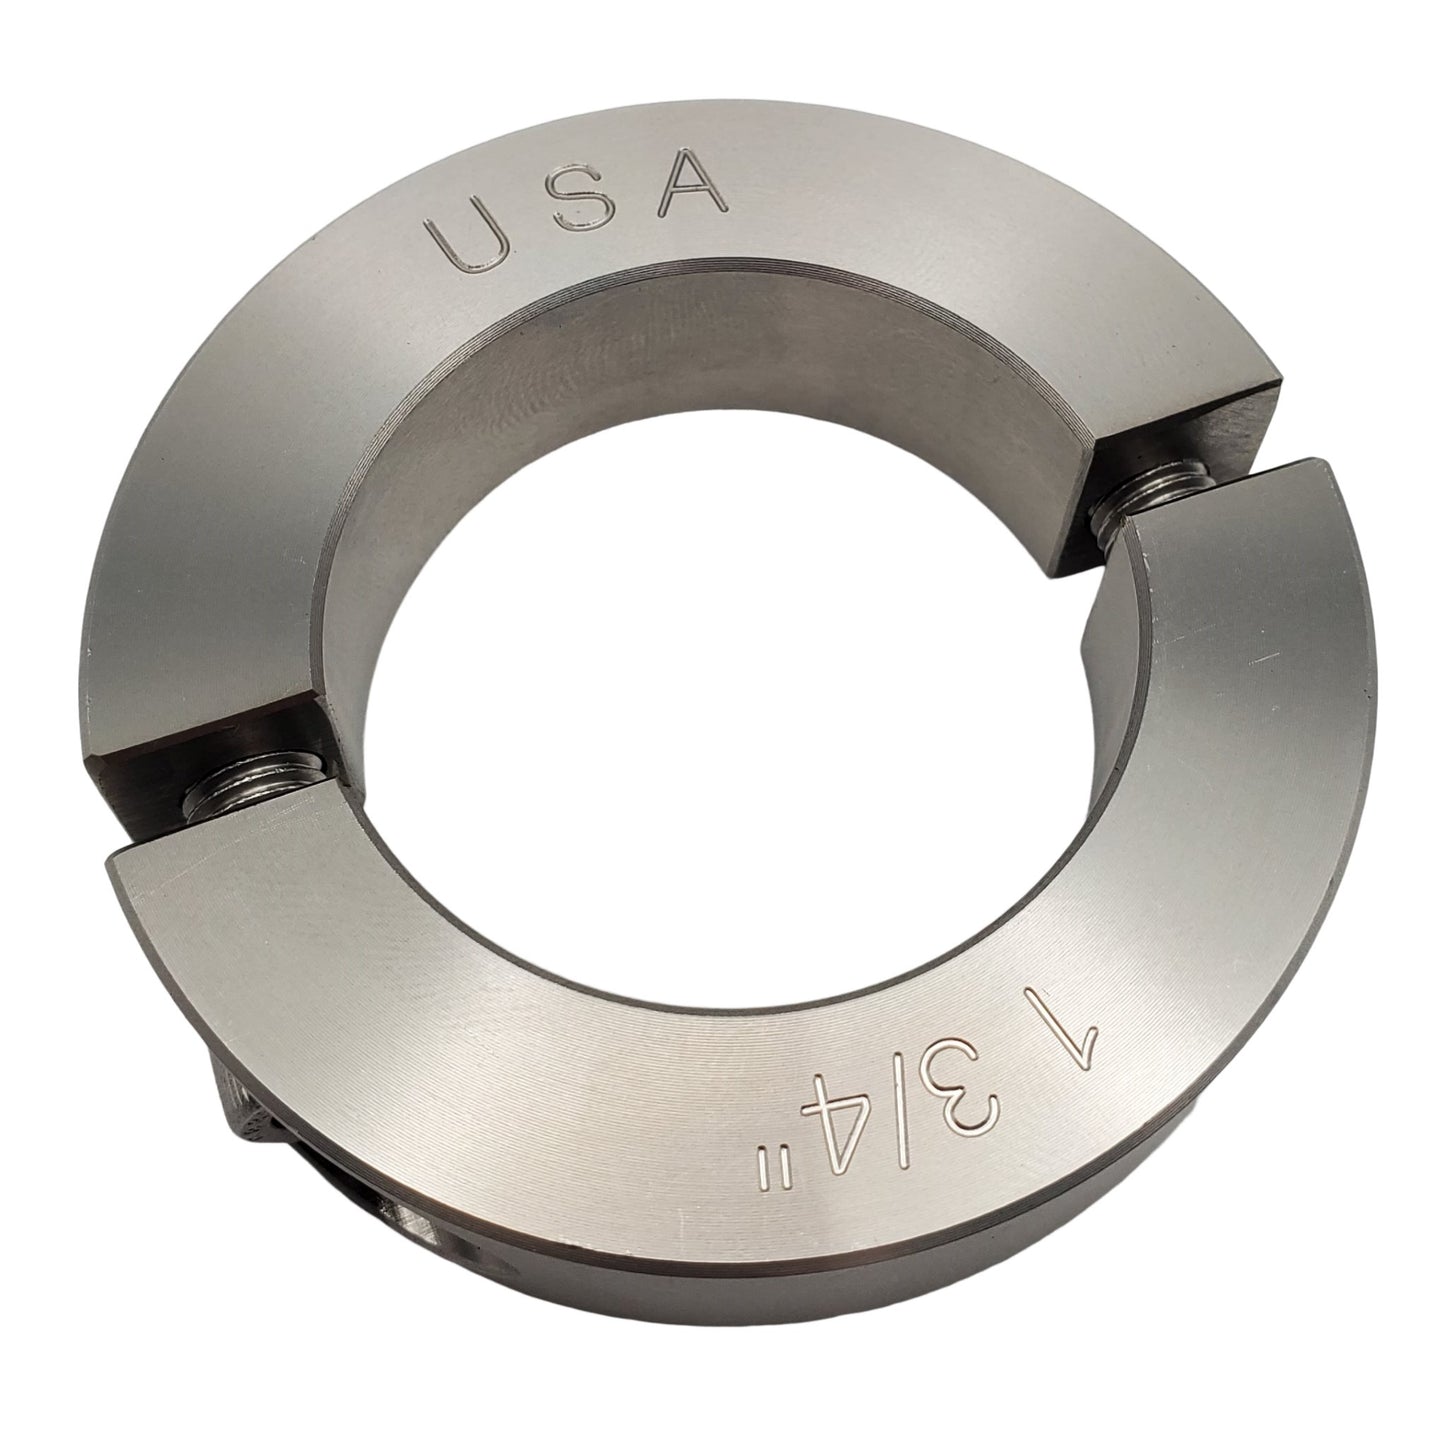 1.75" Diameter - Clamping Two Piece Shaft Collar - 303 Stainless Steel